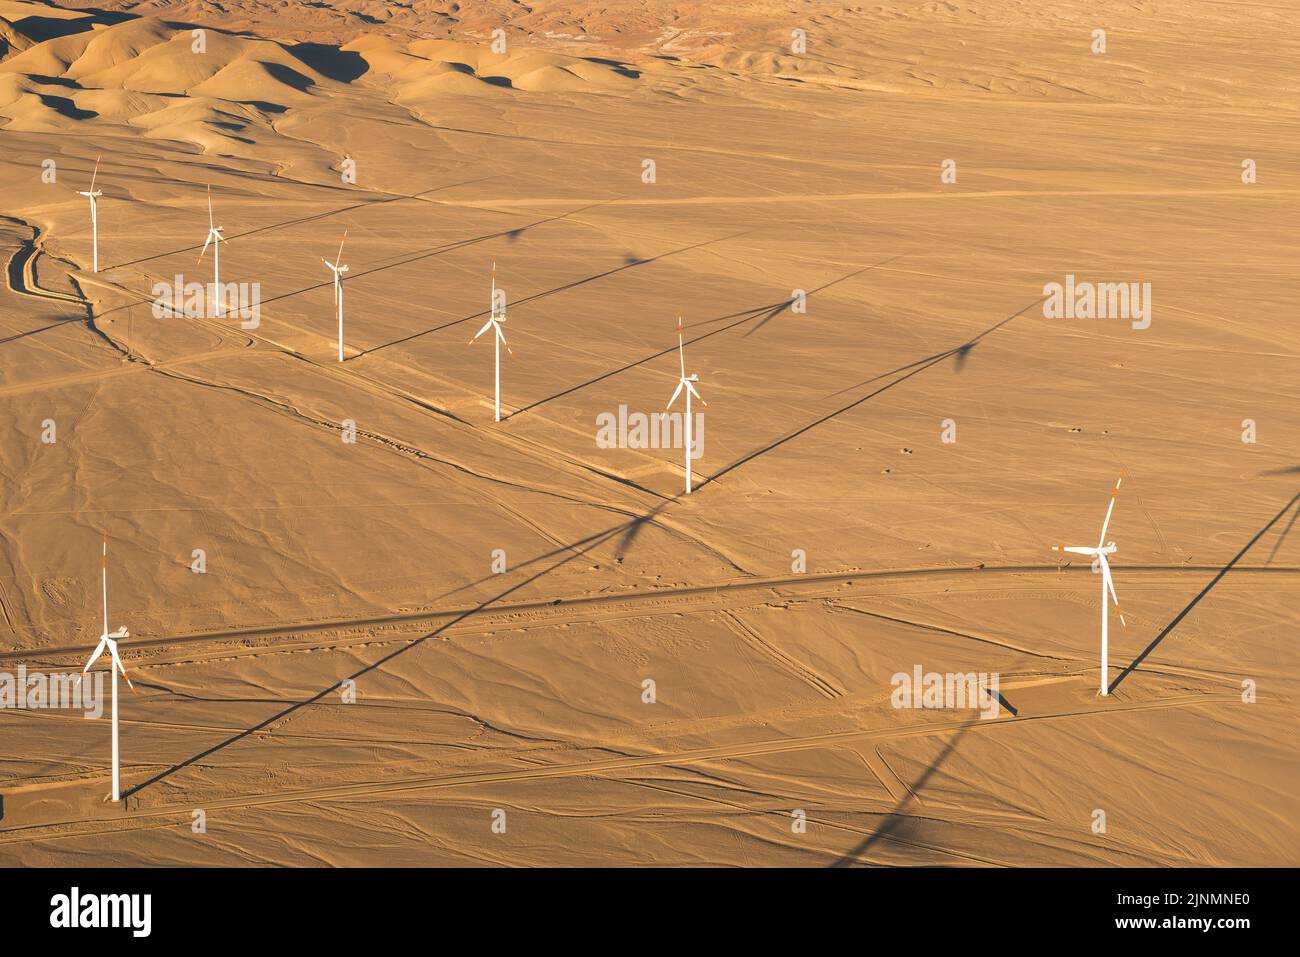 Aerial view of a wind farm in the Atacama Desert outside the city of Calama, Chile Stock Photo